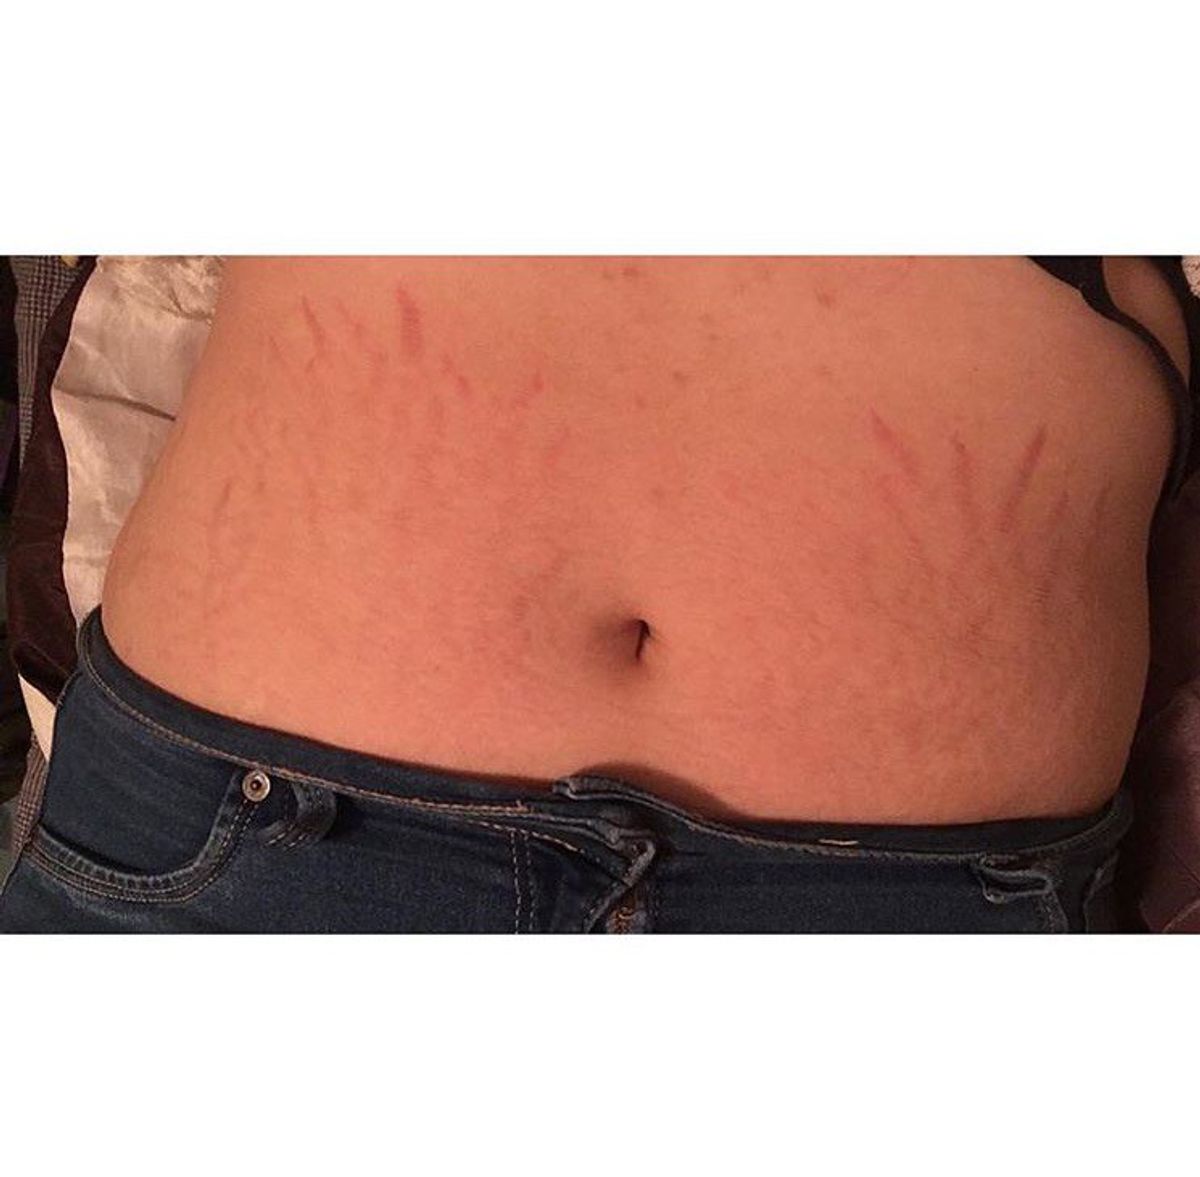 What I Learned From My Stretch Marks